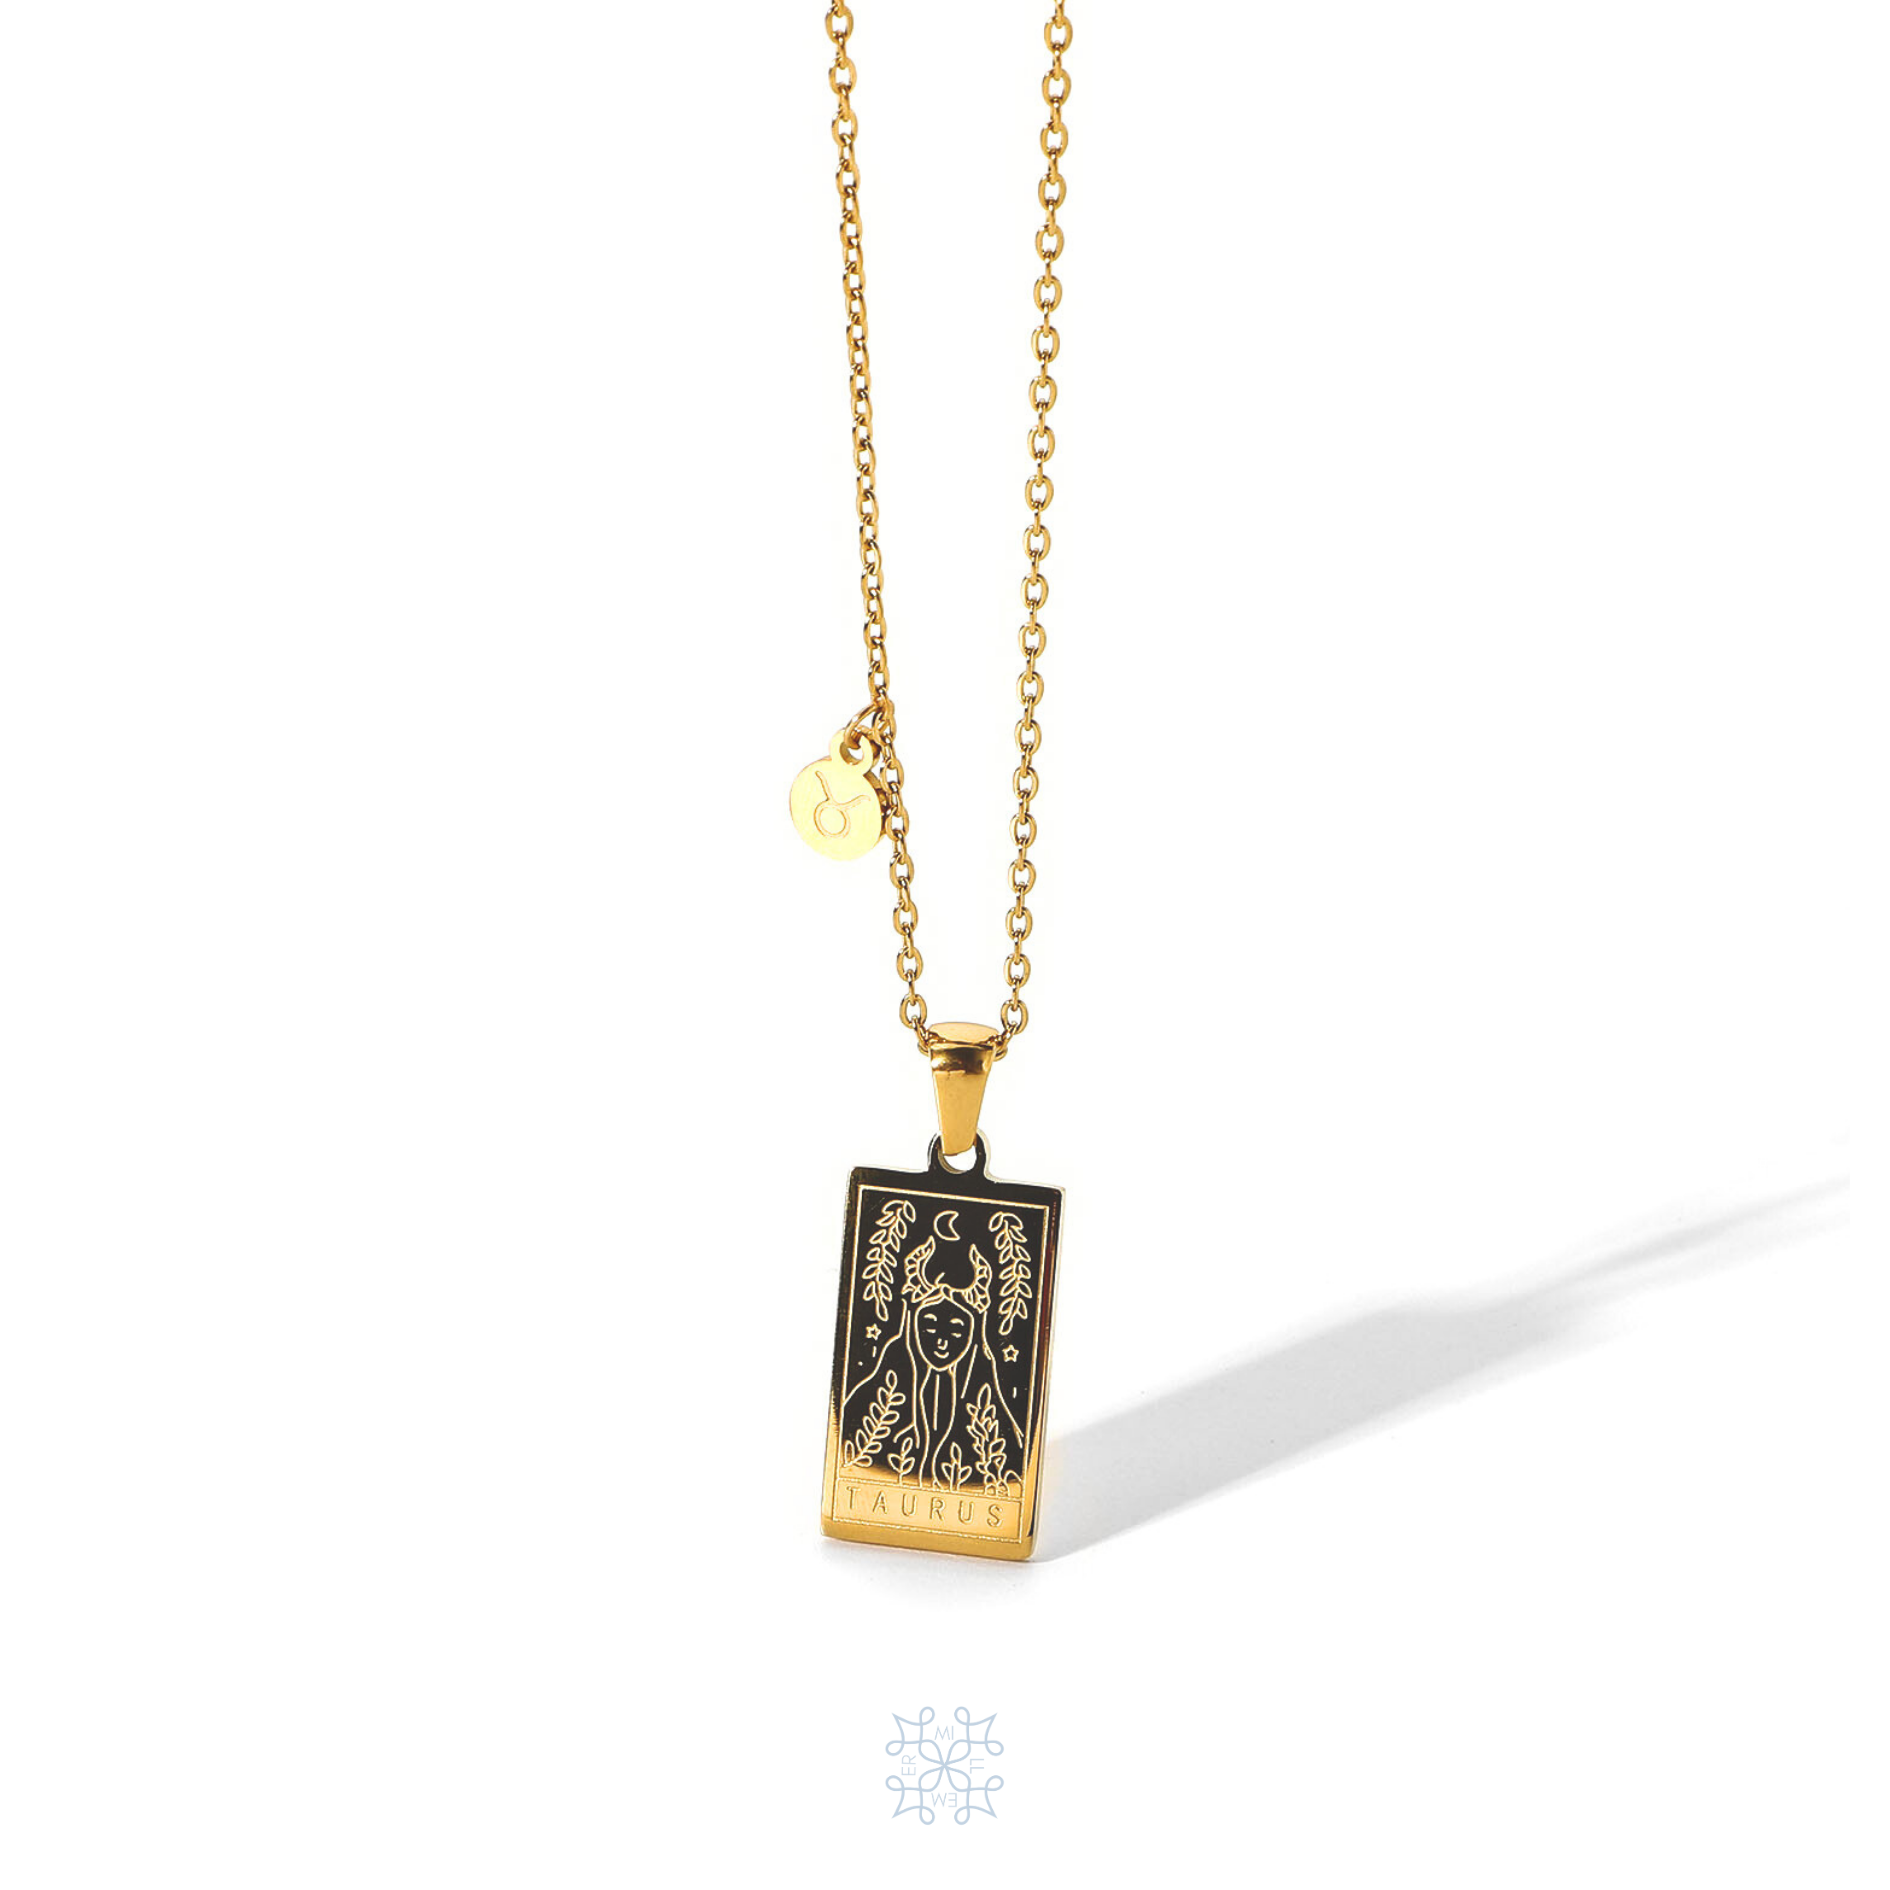 Rectangular gold pendant with Taurus engraved and the word Taurus in the bottom. Gold pendant with a chain necklace. In the side of the gold pendant is a circle small medallion with the symbol of Taurus engraved on it. Taurus zodiac pendant gold necklace.